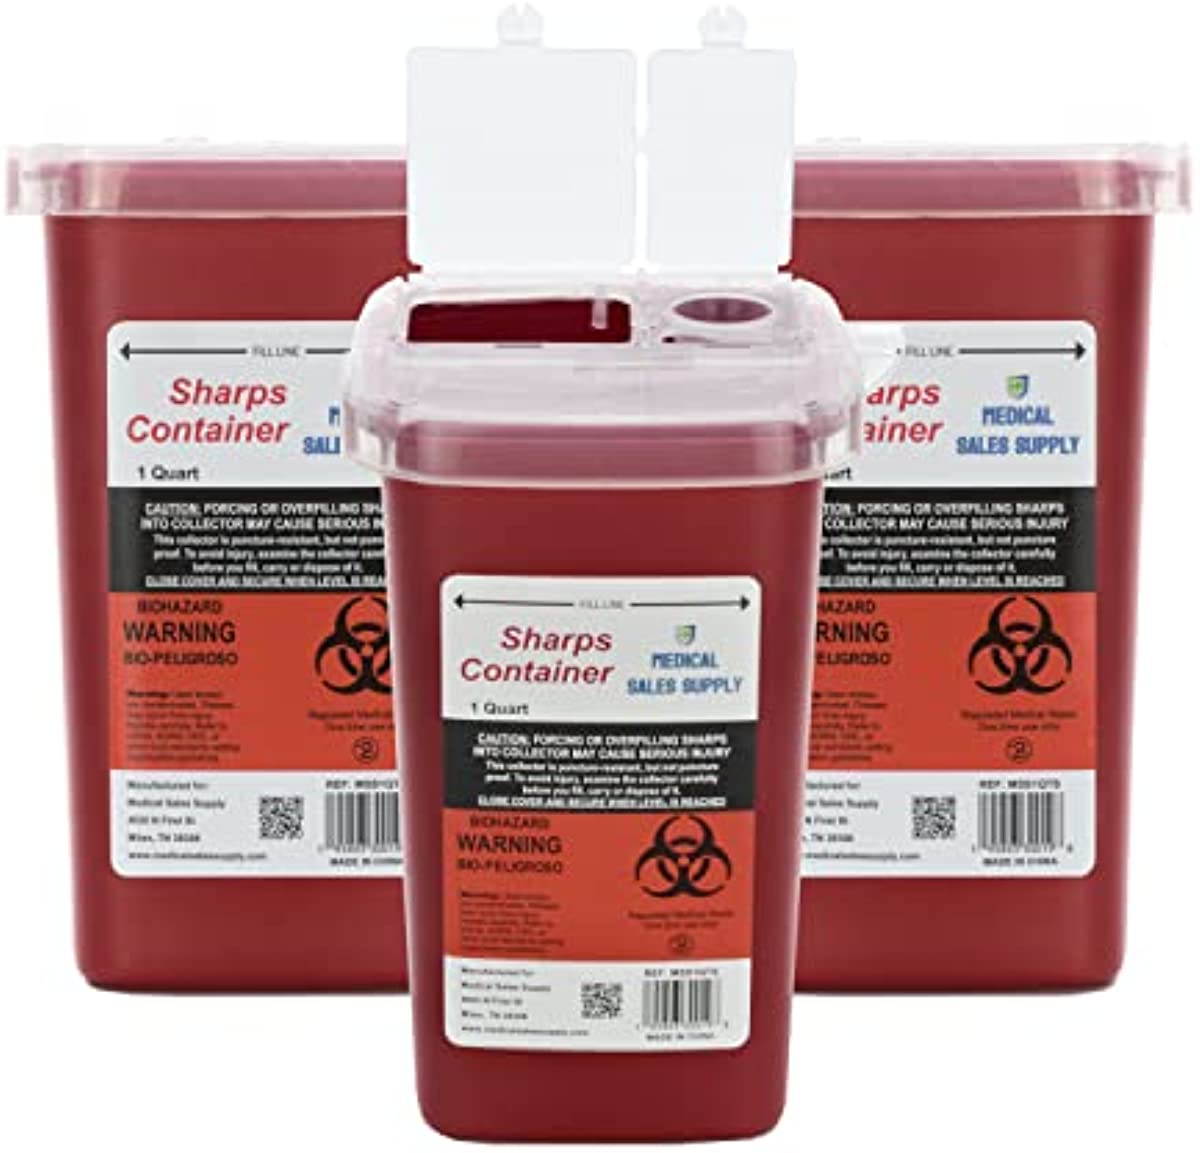 Medical Sales Supply 1 Quart Size (Pack of 3) Sharps Disposal Container - Approved for Home and Professional use